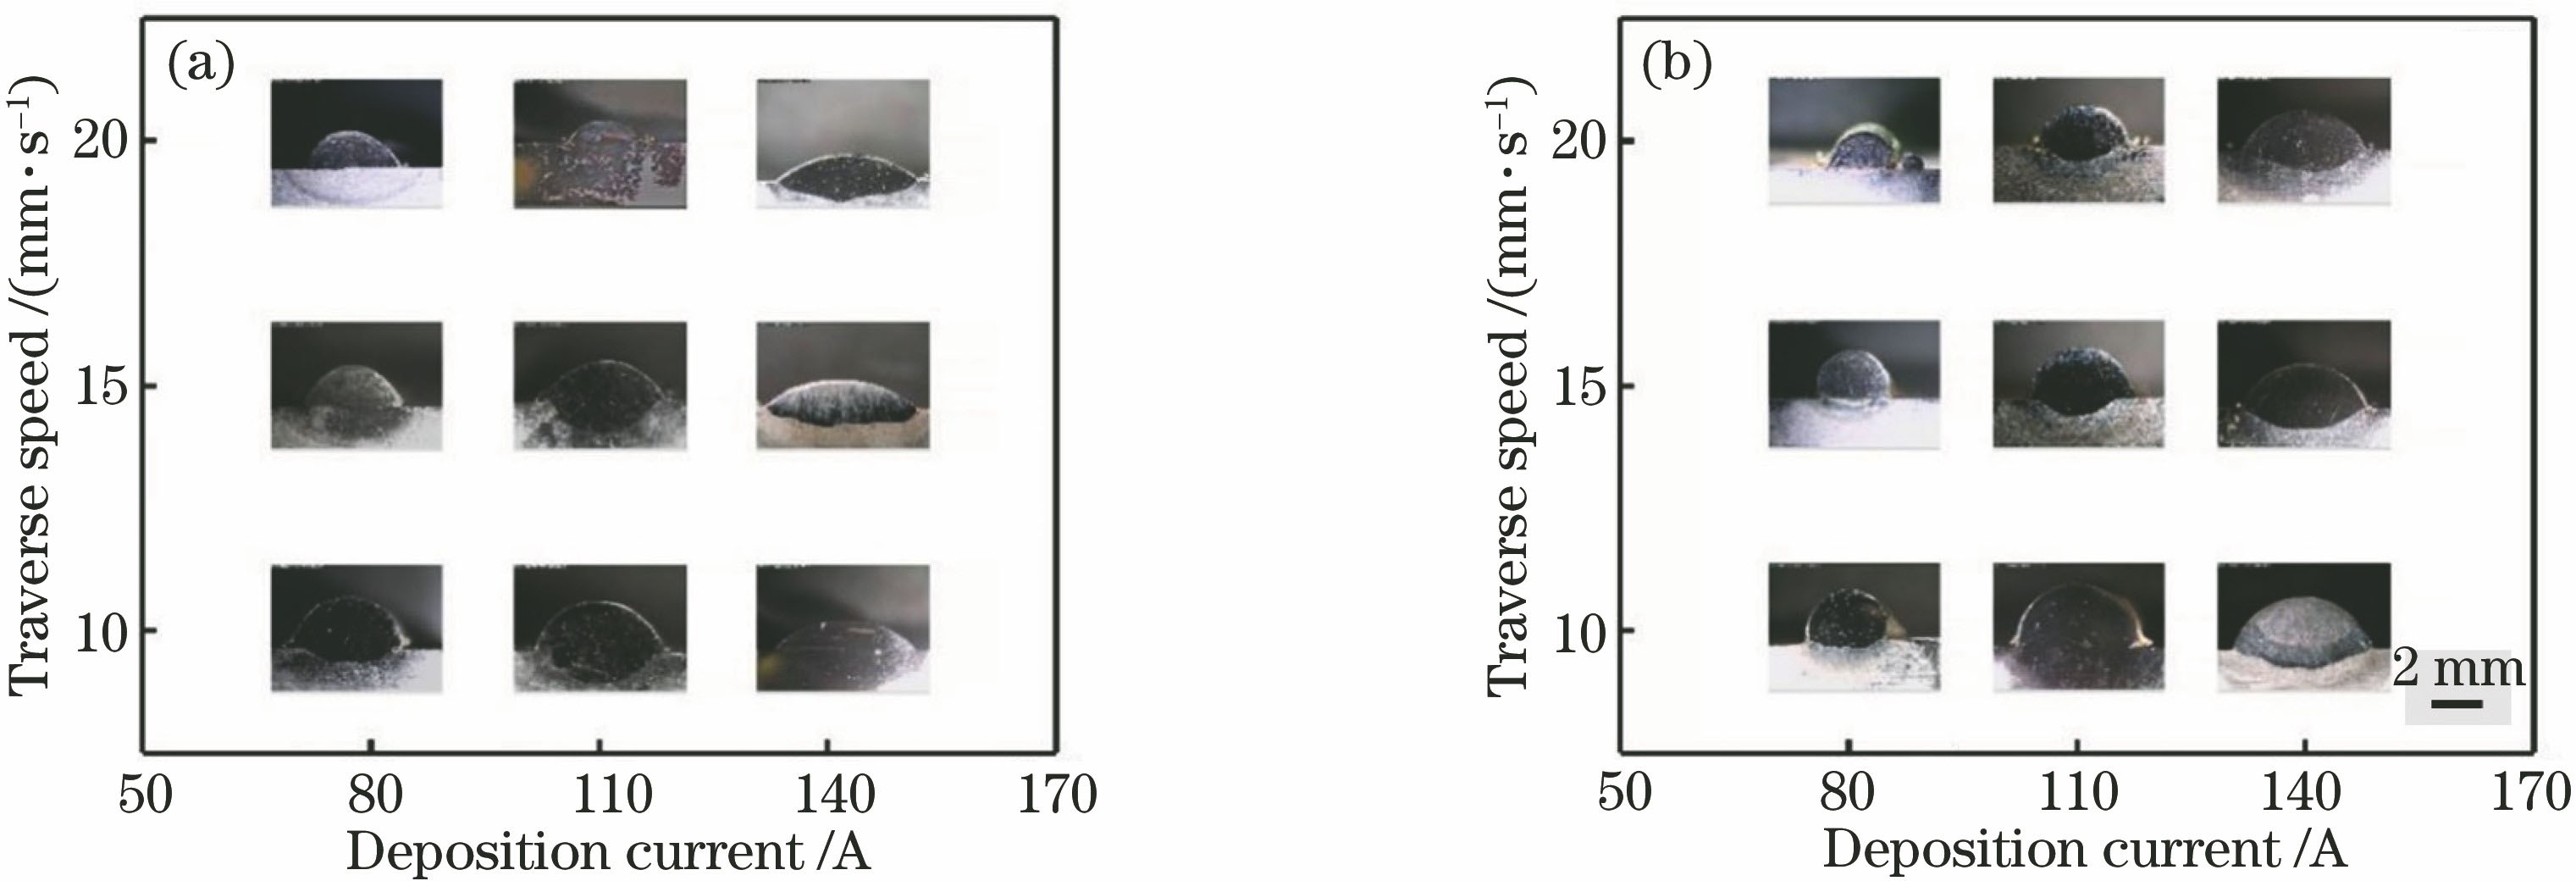 Macroscopic morphologies of single-track deposited layers with different powder feeding rates. (a) 15 g·min-1; (b) 25 g·min-1